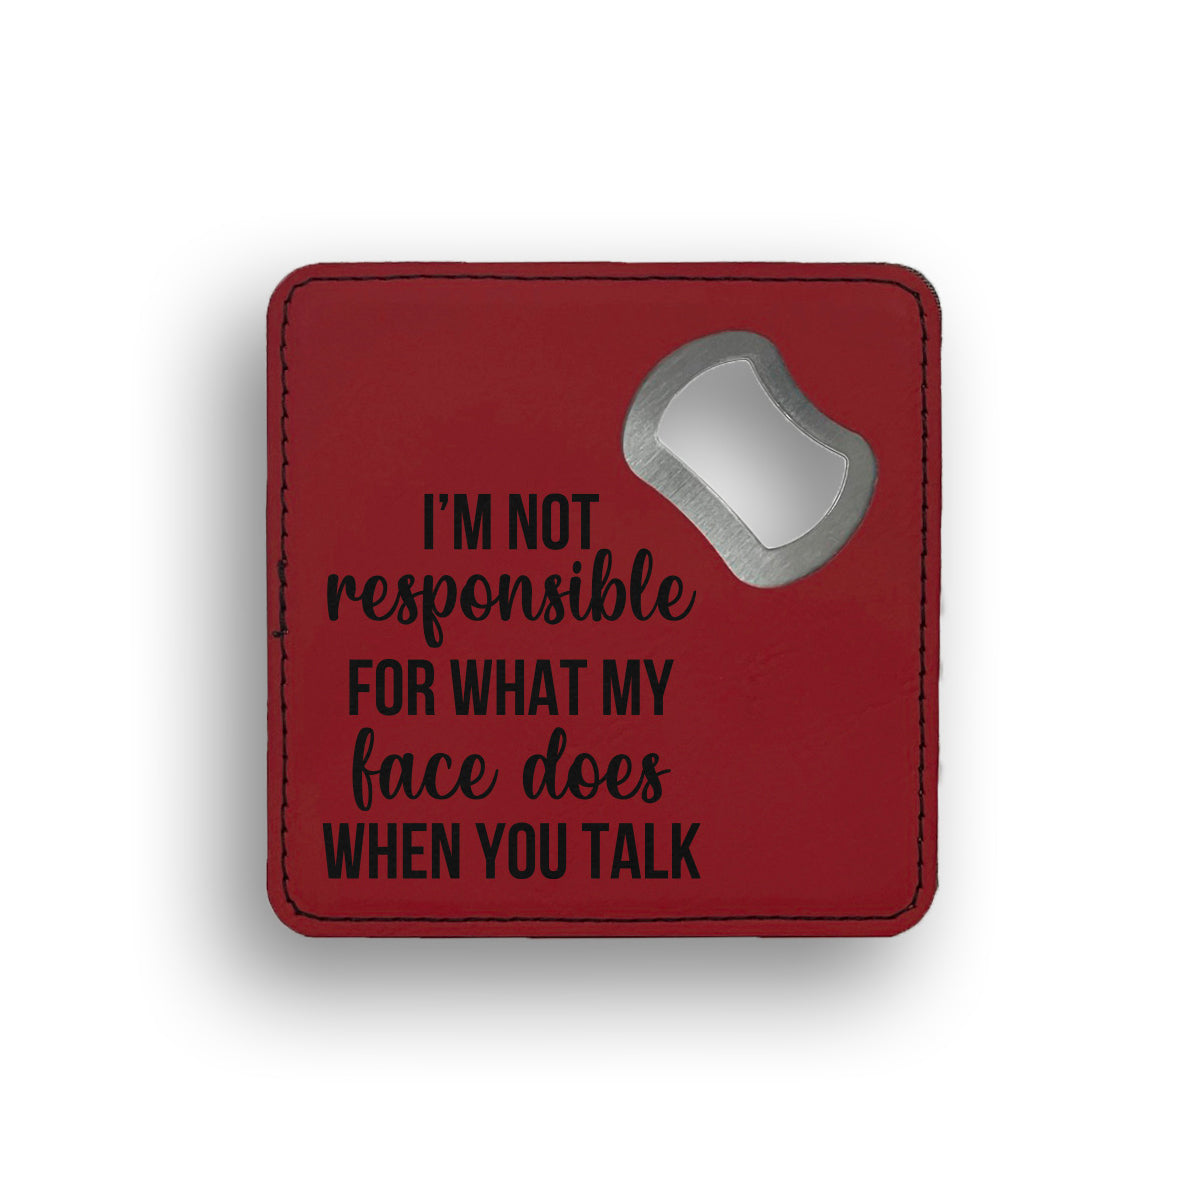 Responsible Face Does Bottle Opener Coaster